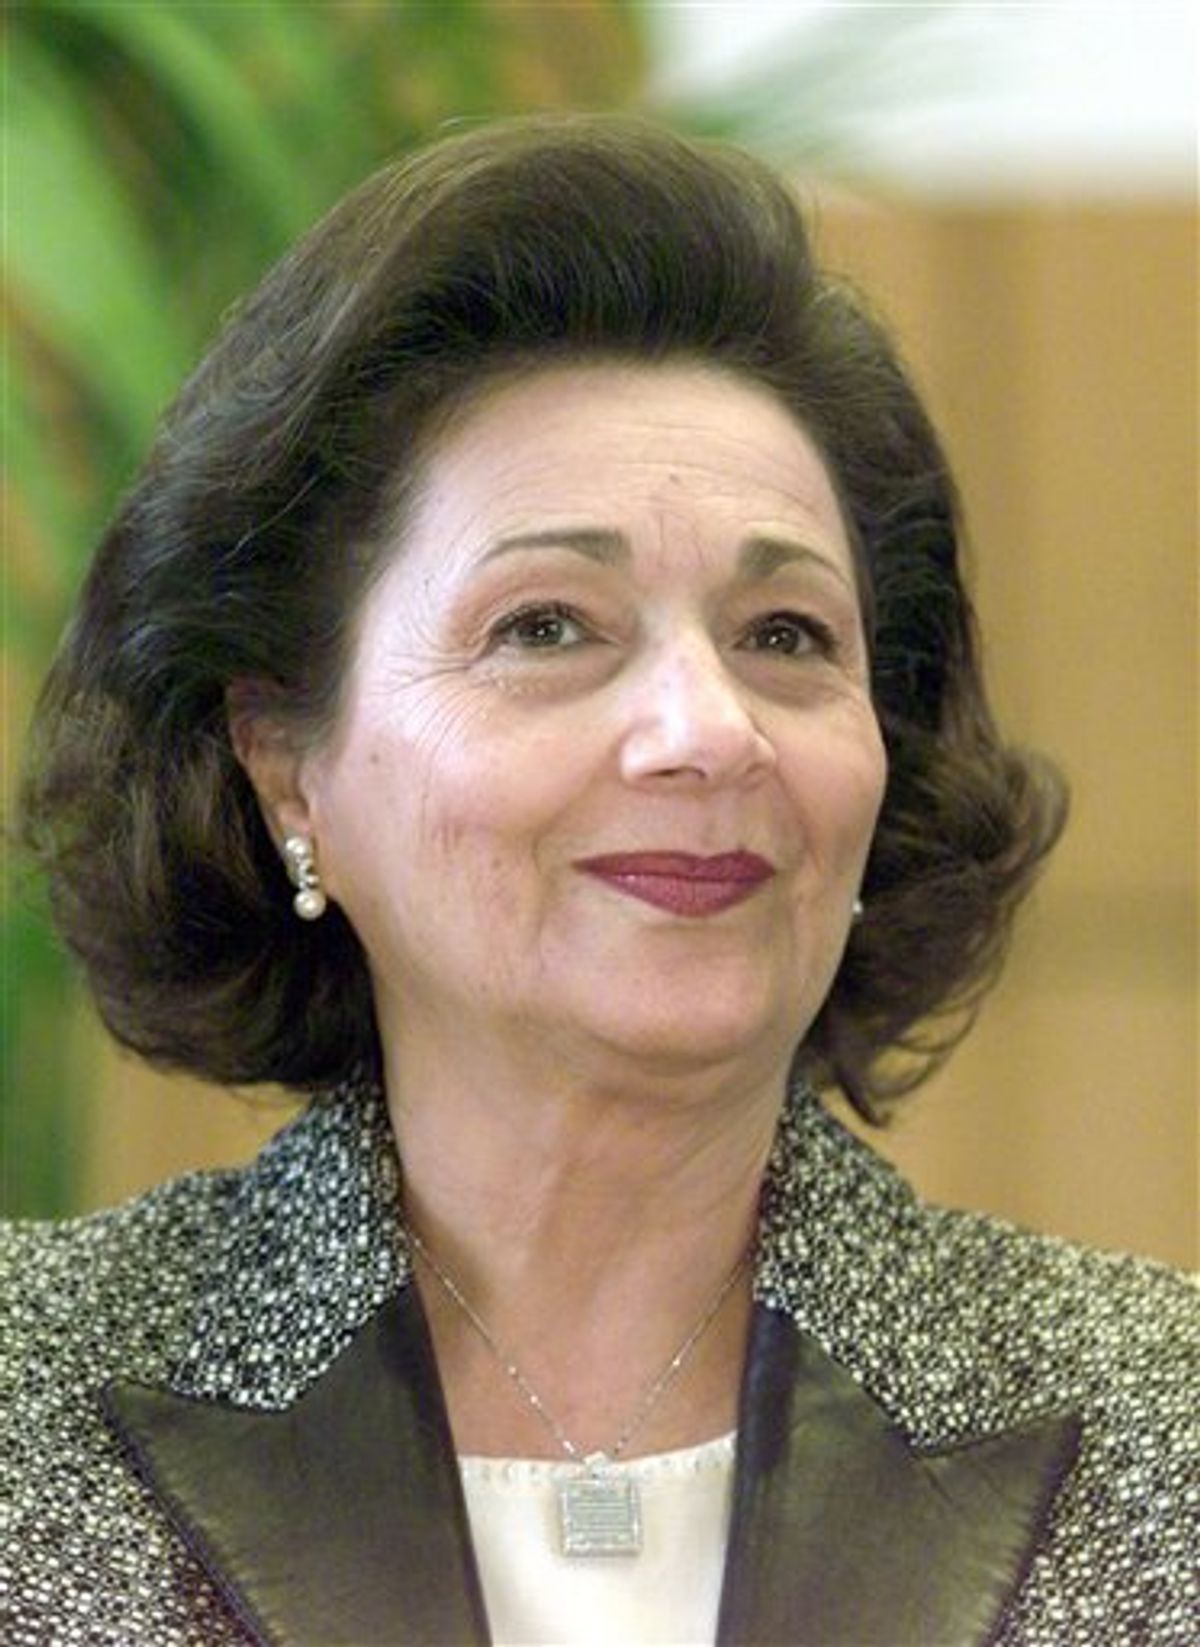 FILE - In this Feb. 19, 2003 file photo, Suzanne Mubarak, wife of Egypt's President Hosni Mubarak, smiles at the Free University Berlin. Egyptian authorities have ordered the detention of Suzanne Mubarak, wife of deposed President Hosni Mubarak, the government-run MENA news service says. The move on Friday May 13, 2011 comes a day after the government reported that Mubarak and his wife were questioned over suspicions they illegally amassed vast wealth. (AP Photo/Franka Bruns, File)   (Associated Press)